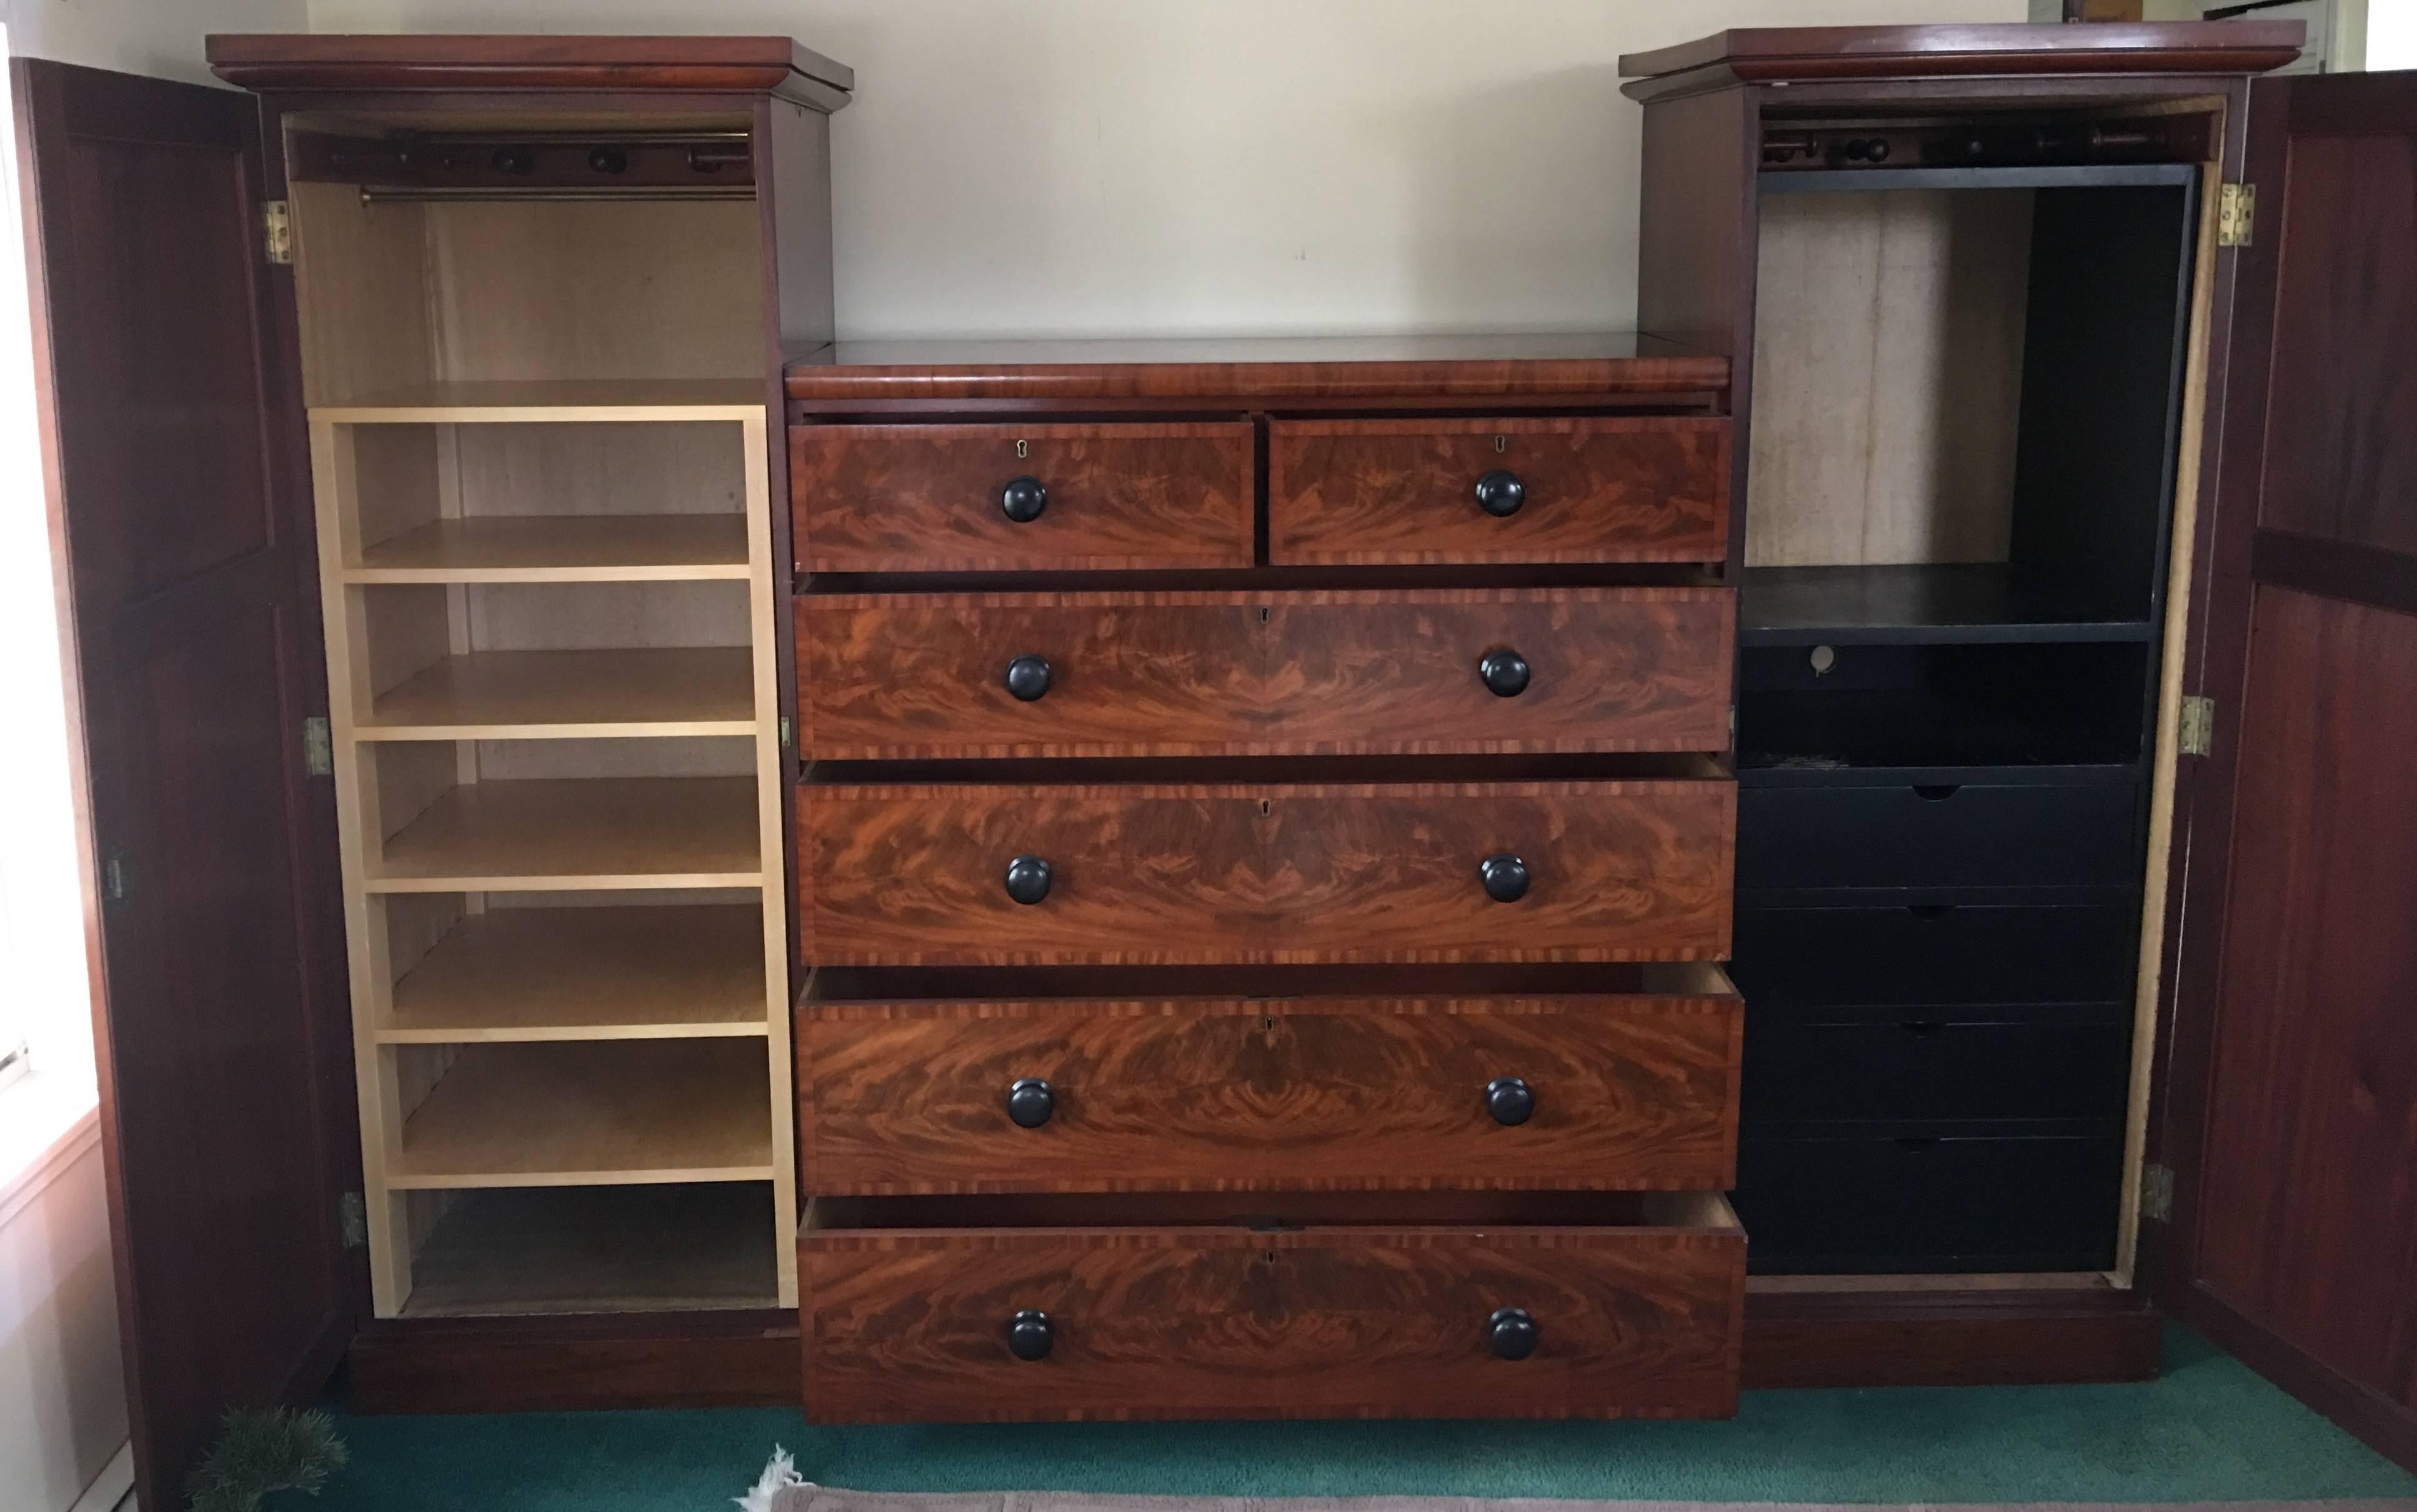 This beautiful mid-19th century English flamed mahogany dresser and wardrobe combination was outfitted with shelving on one side and drawers and space for a small TV on the other (both can be removed) the cabinets flanking the large six-drawer chest